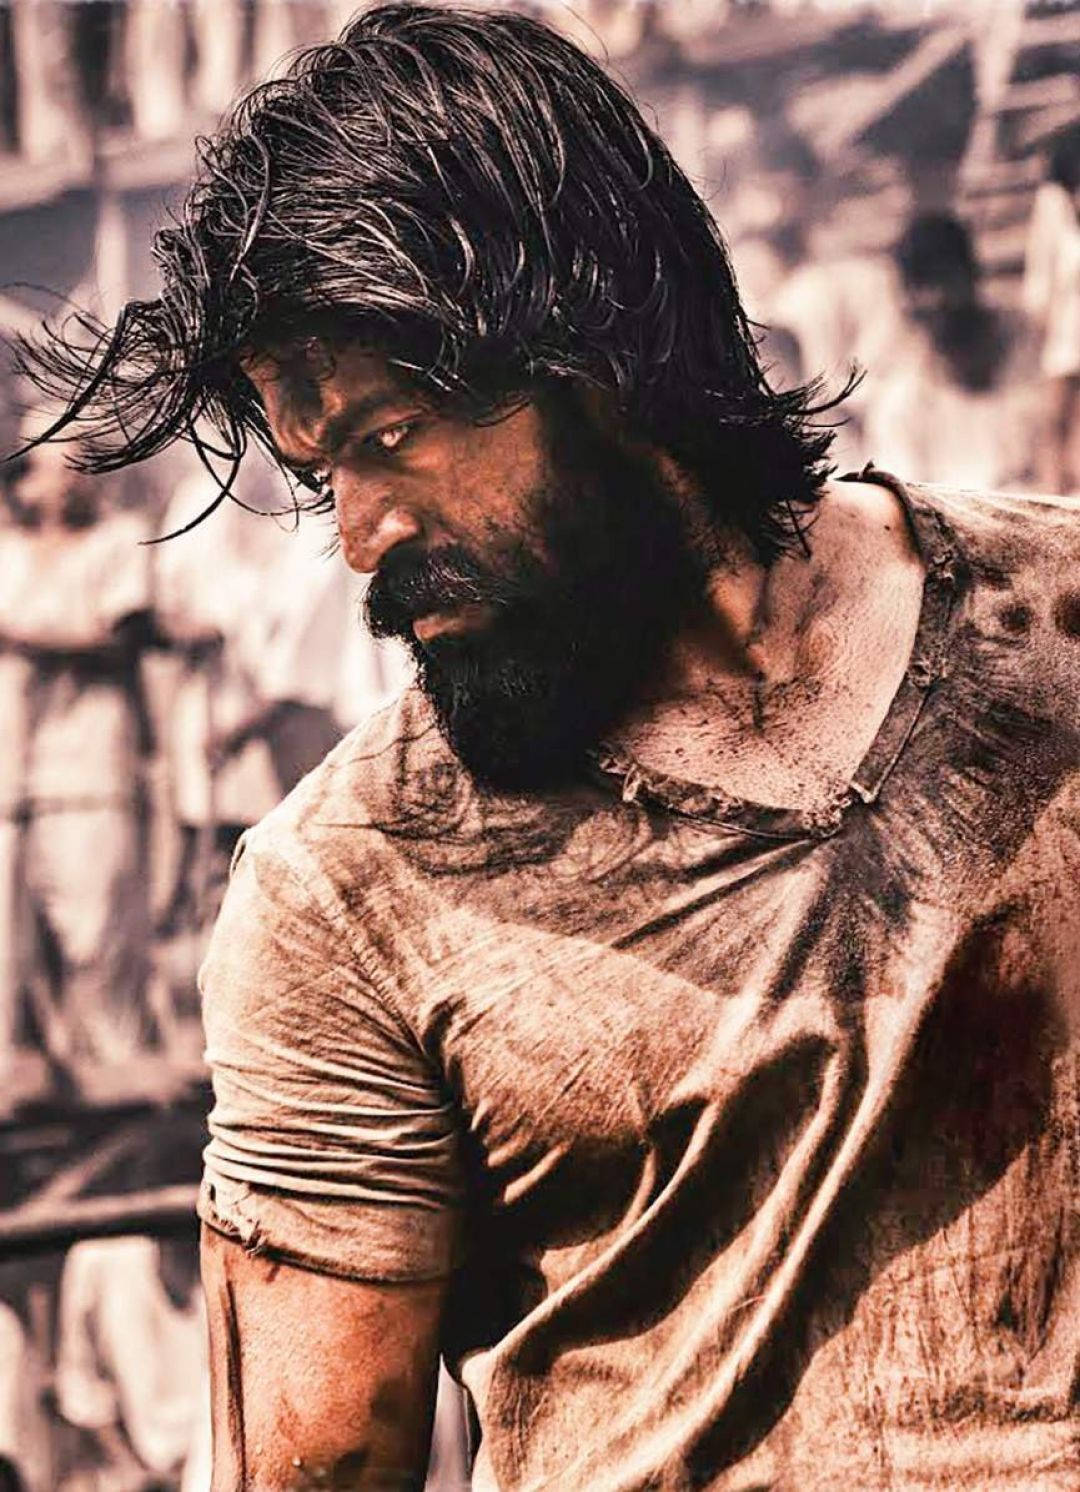 Rocky Bhai showcasing his signature rugged look with a fierce beard and intense eyes. Wallpaper